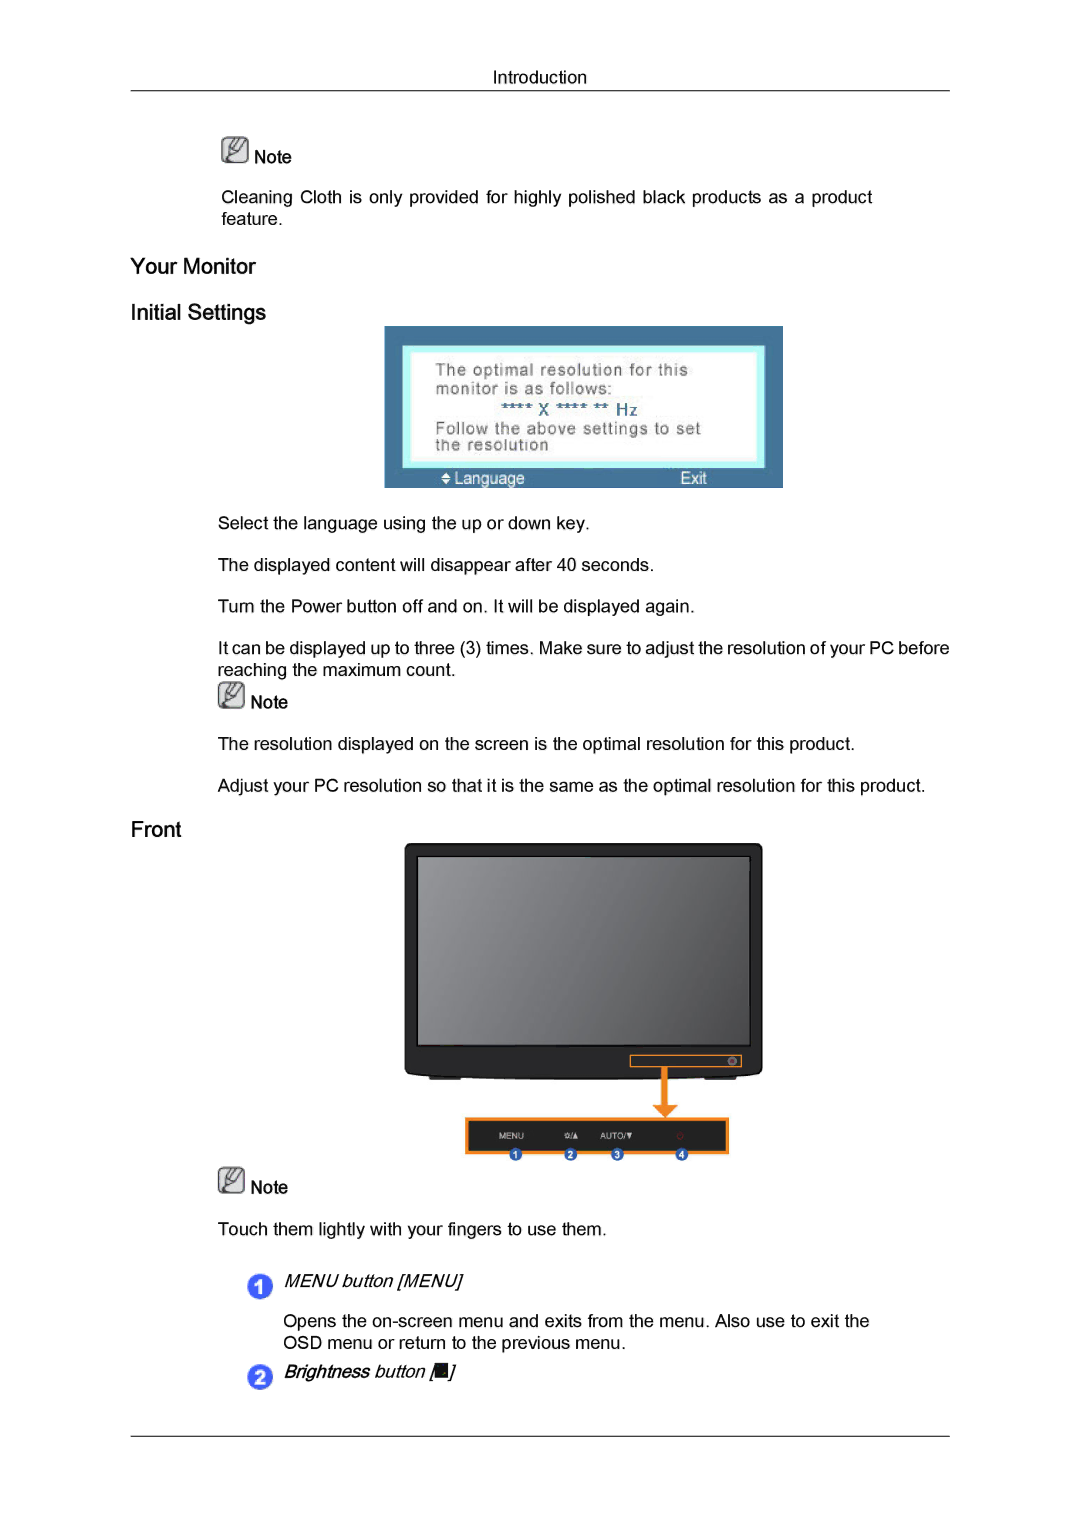 Samsung LD190N user manual Your Monitor Initial Settings, Front 